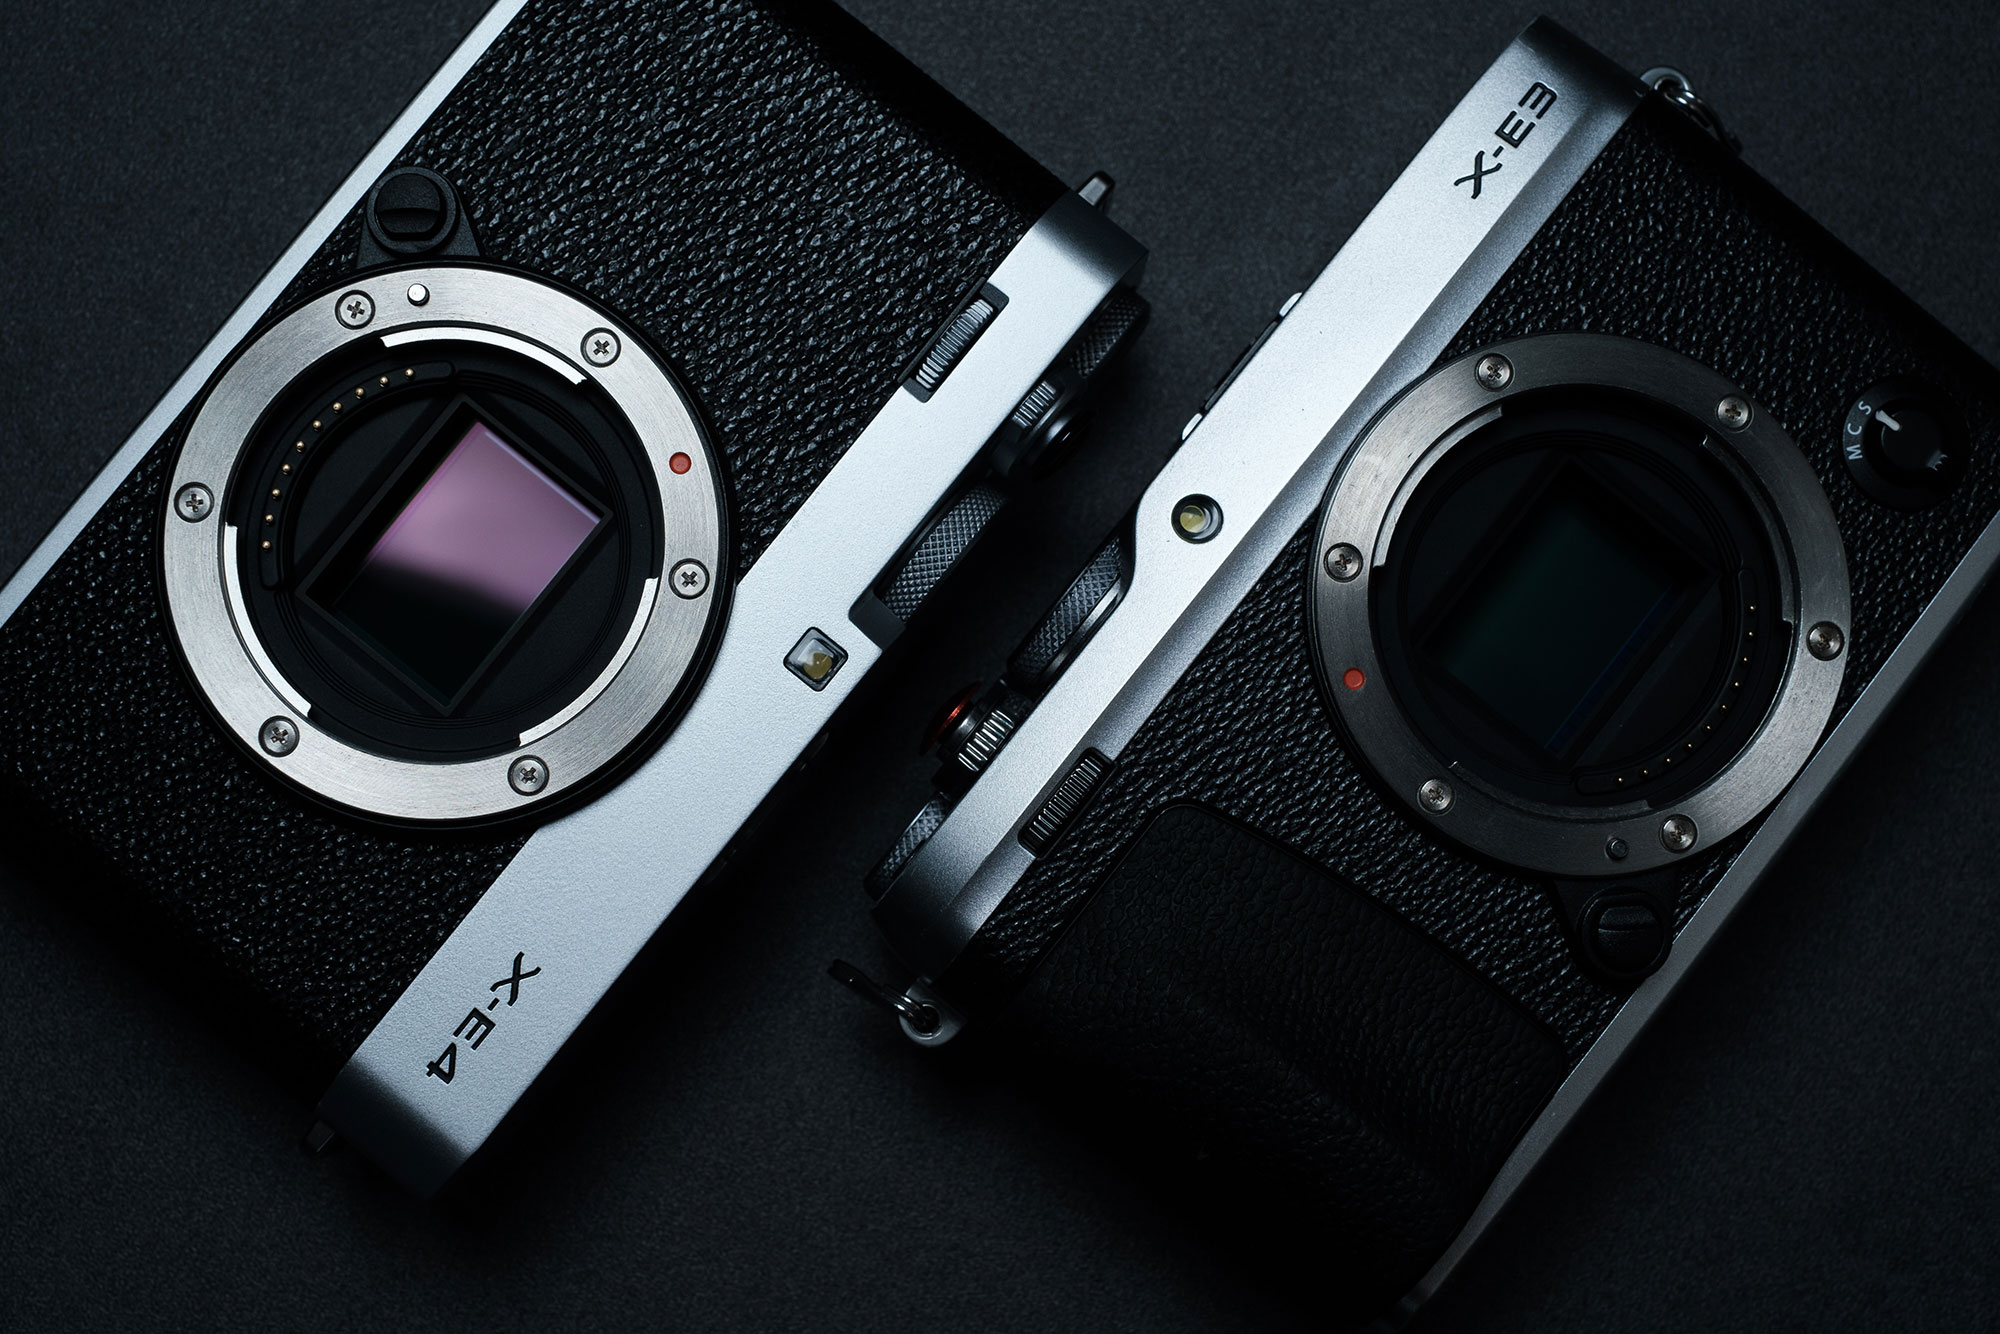 X-E4: The minimalist tool of its time